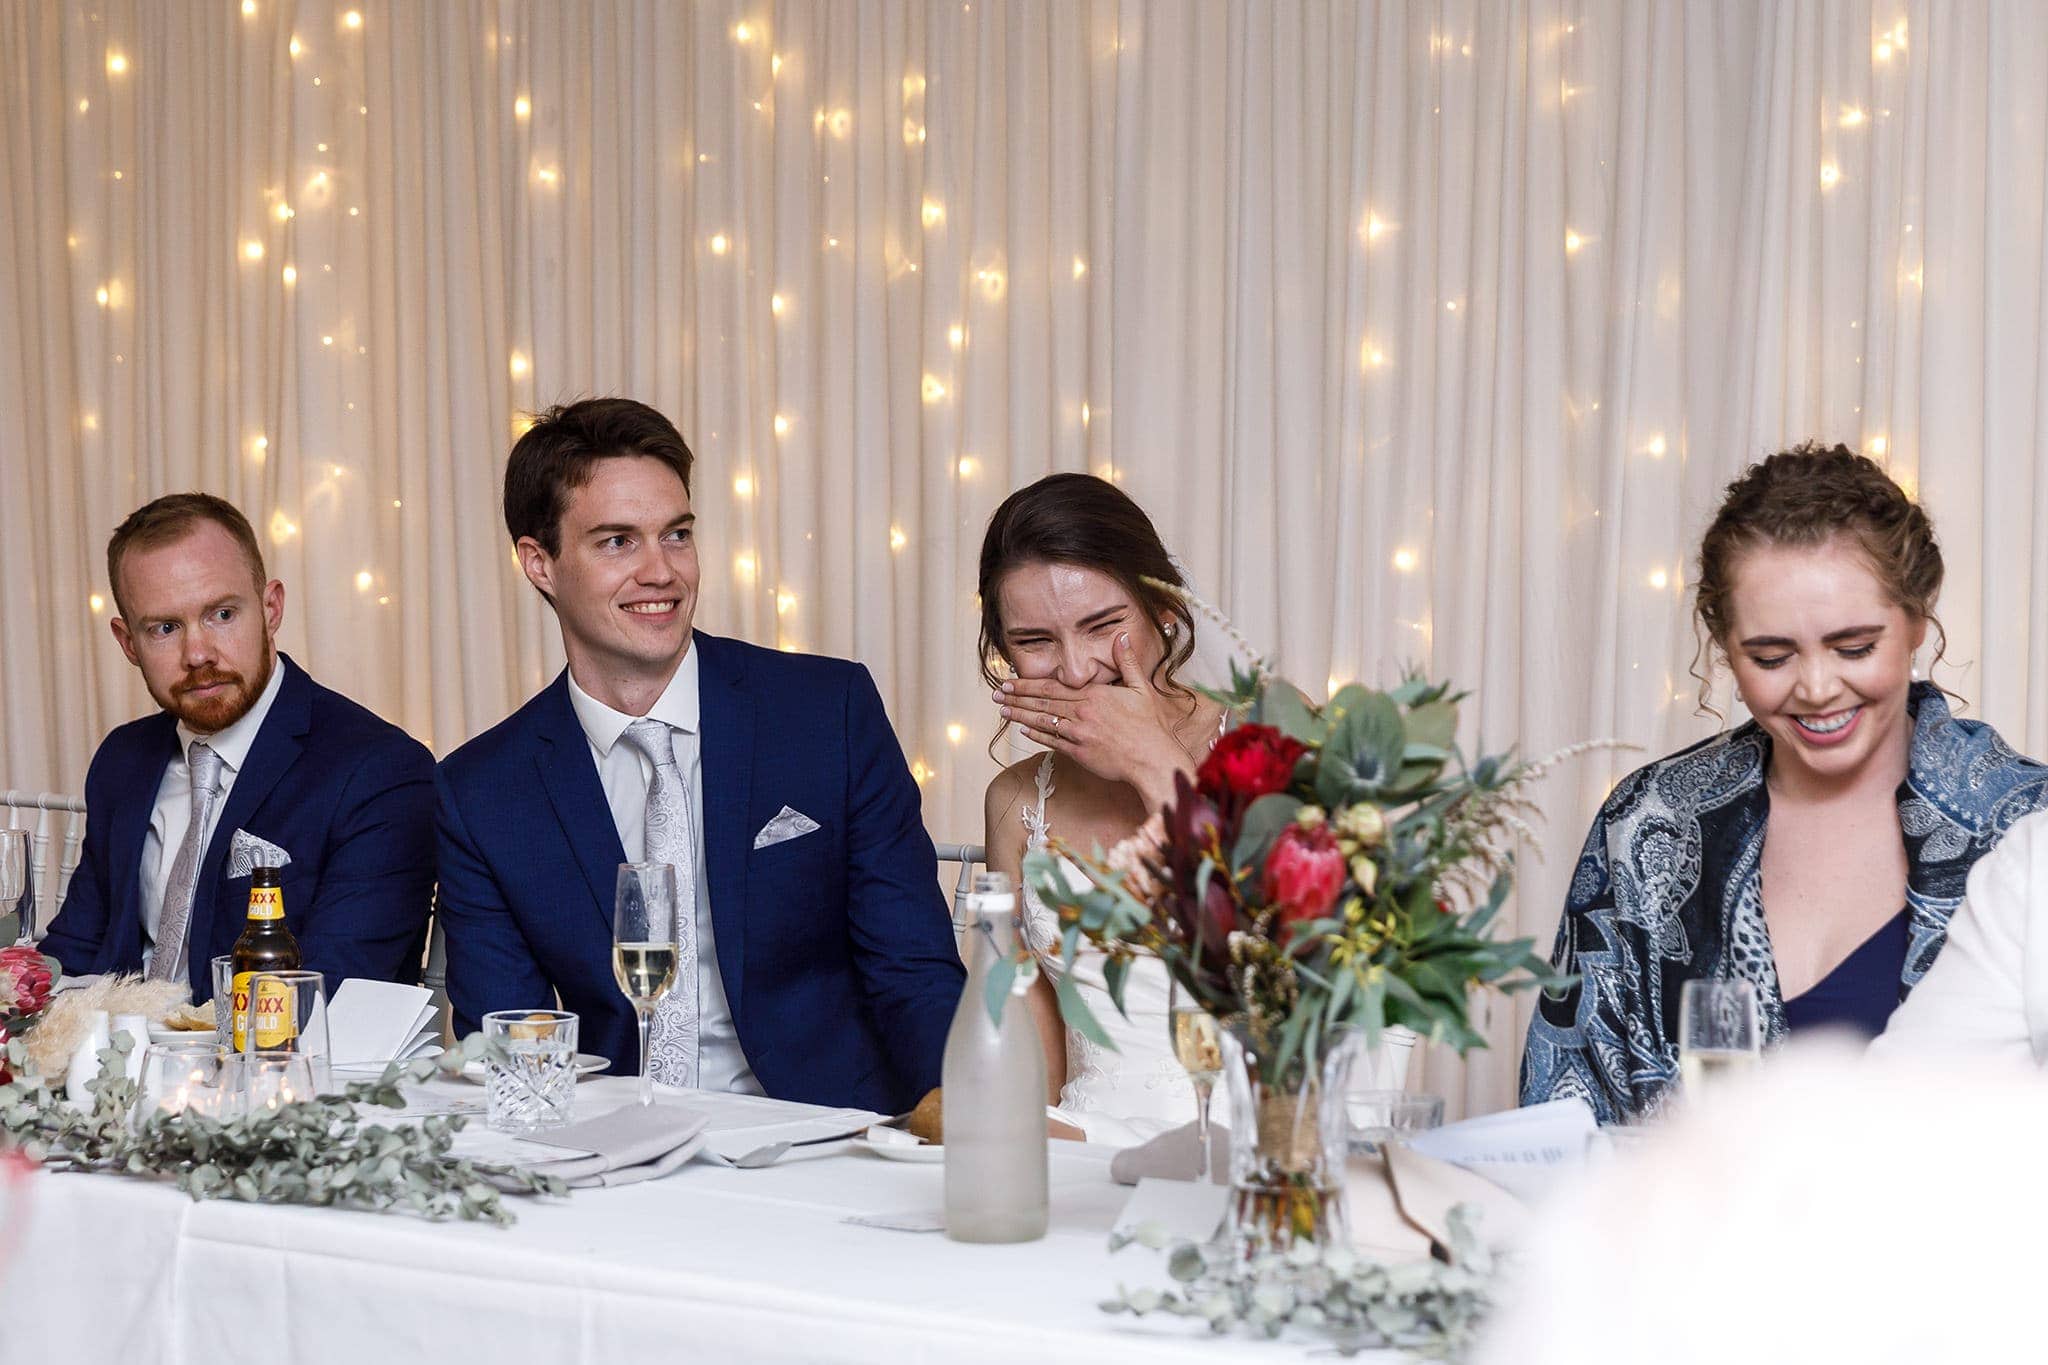 We love wedding couples reactions during wedding speeches